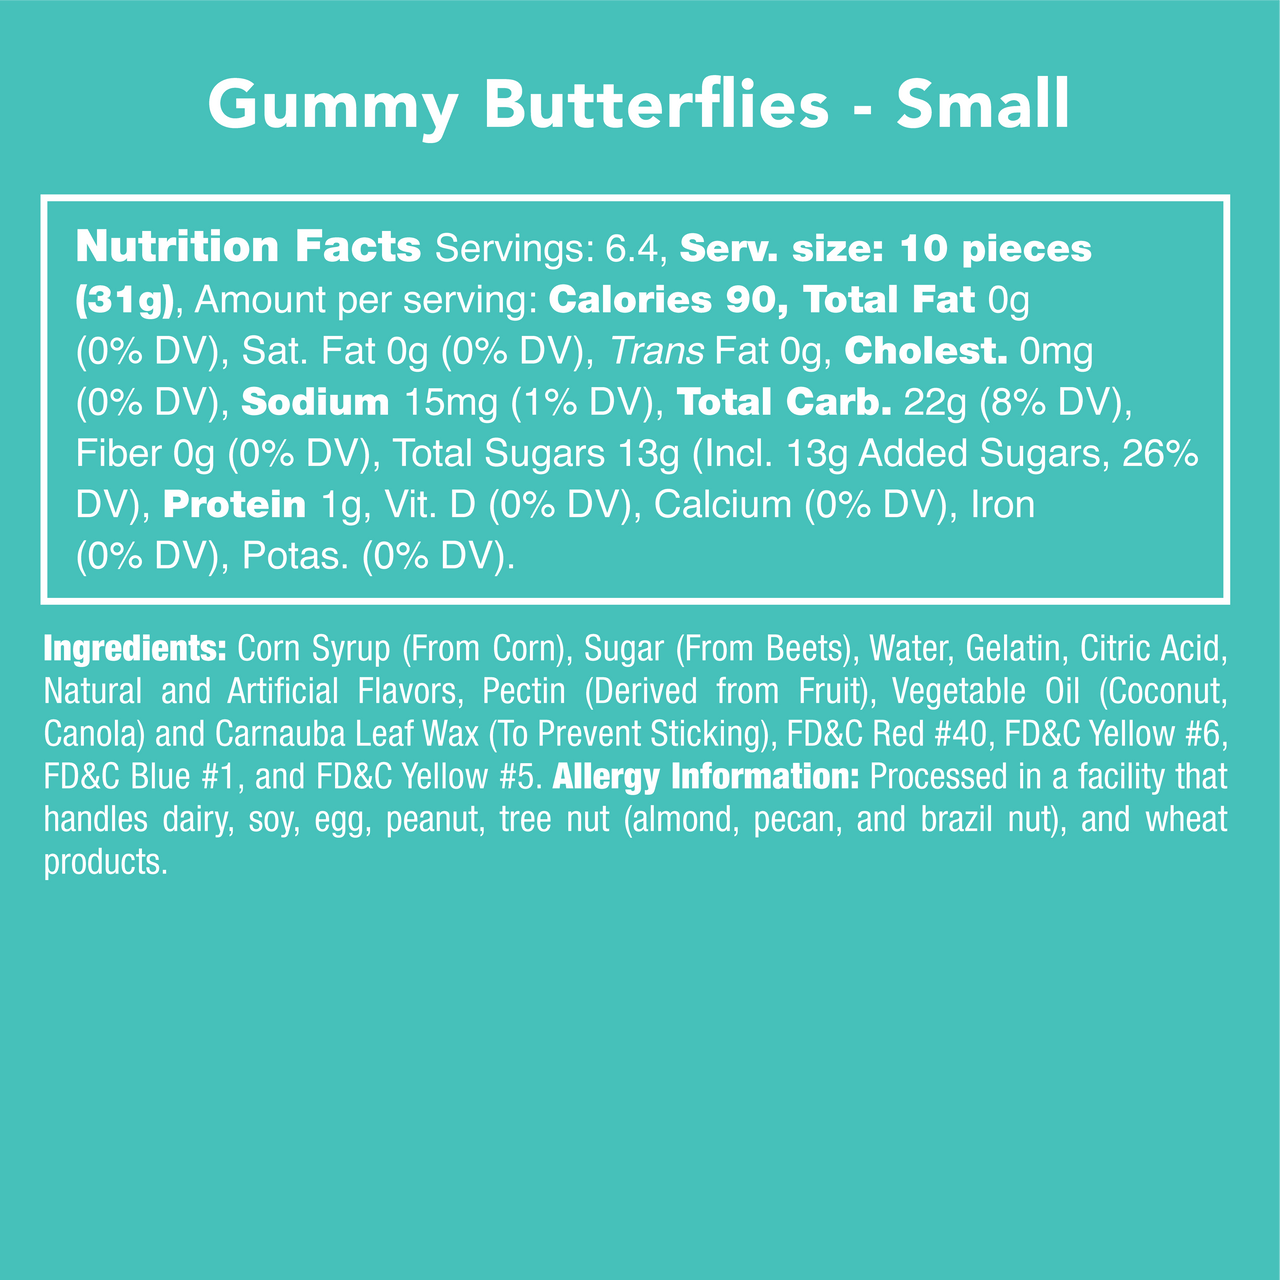 Candy Club-Gummy Butterflies Small Jar-RS0000-05-01-Legacy Toys